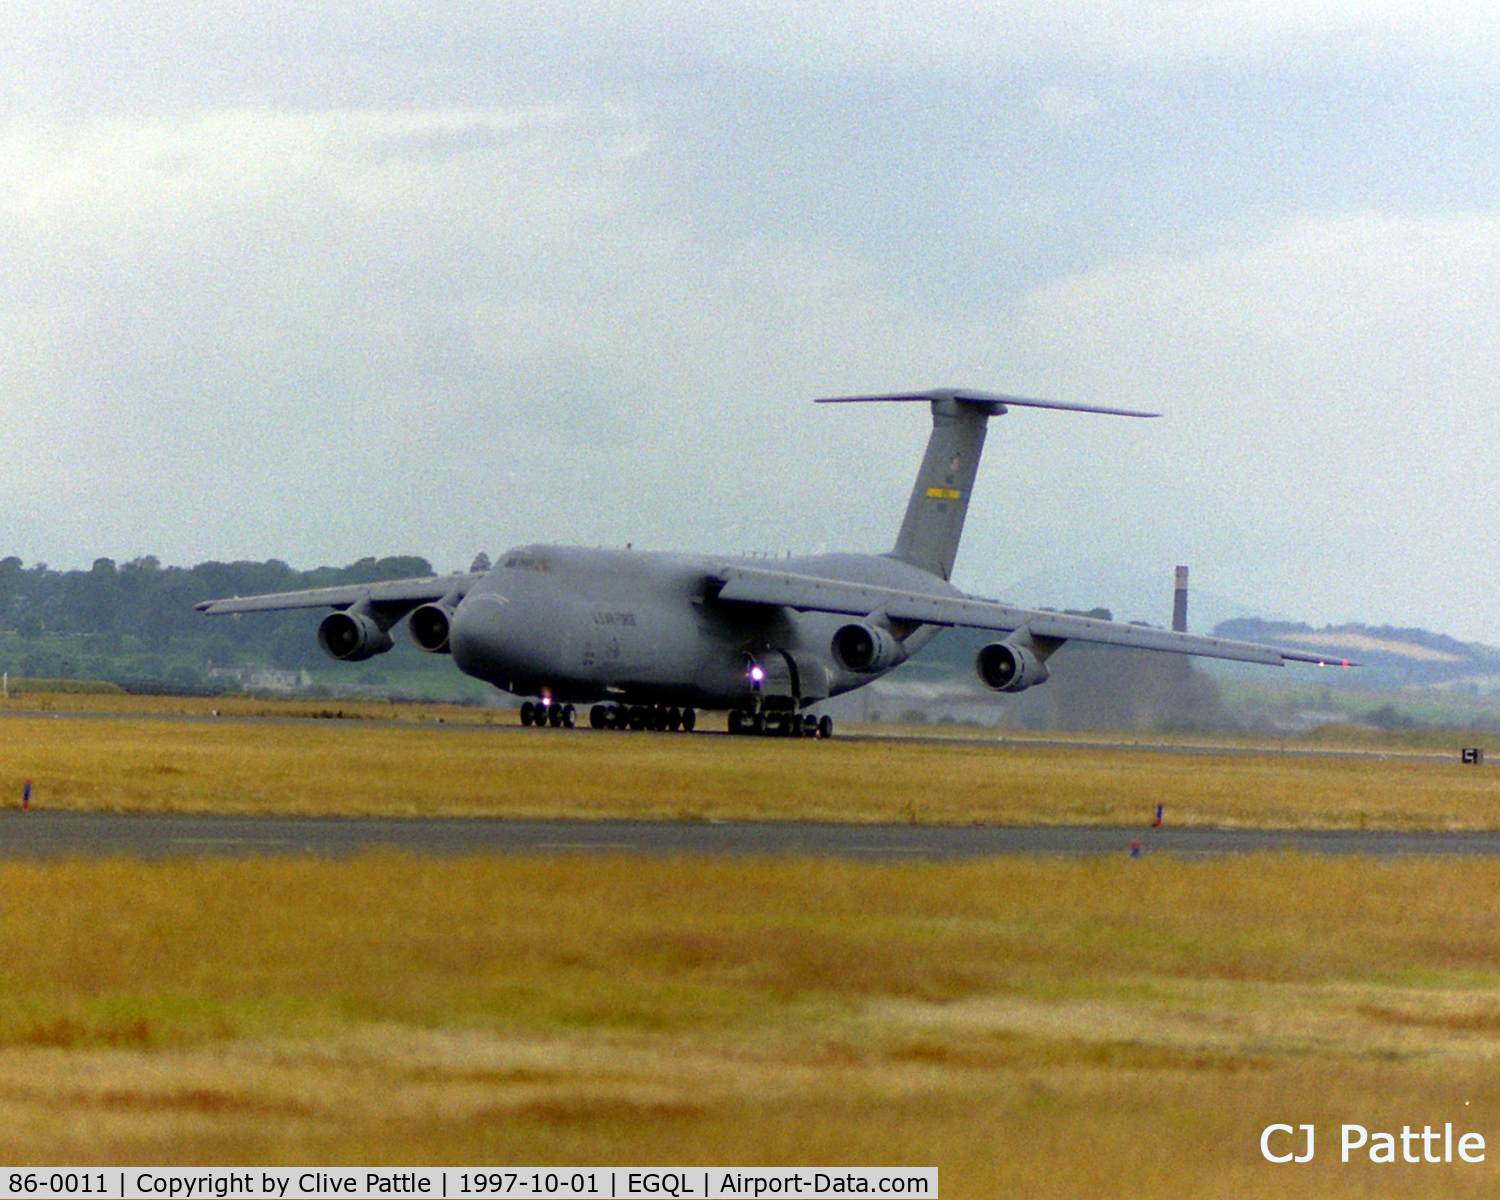 86-0011, 1986 Lockheed C-5M Super Galaxy C/N 500-0097, On its take-off roll from RAF Leuchars - EGQL. No doubt the largest aircraft to visit the base when returning equipment and stores to the US following the closure of nearby USN Edzell.